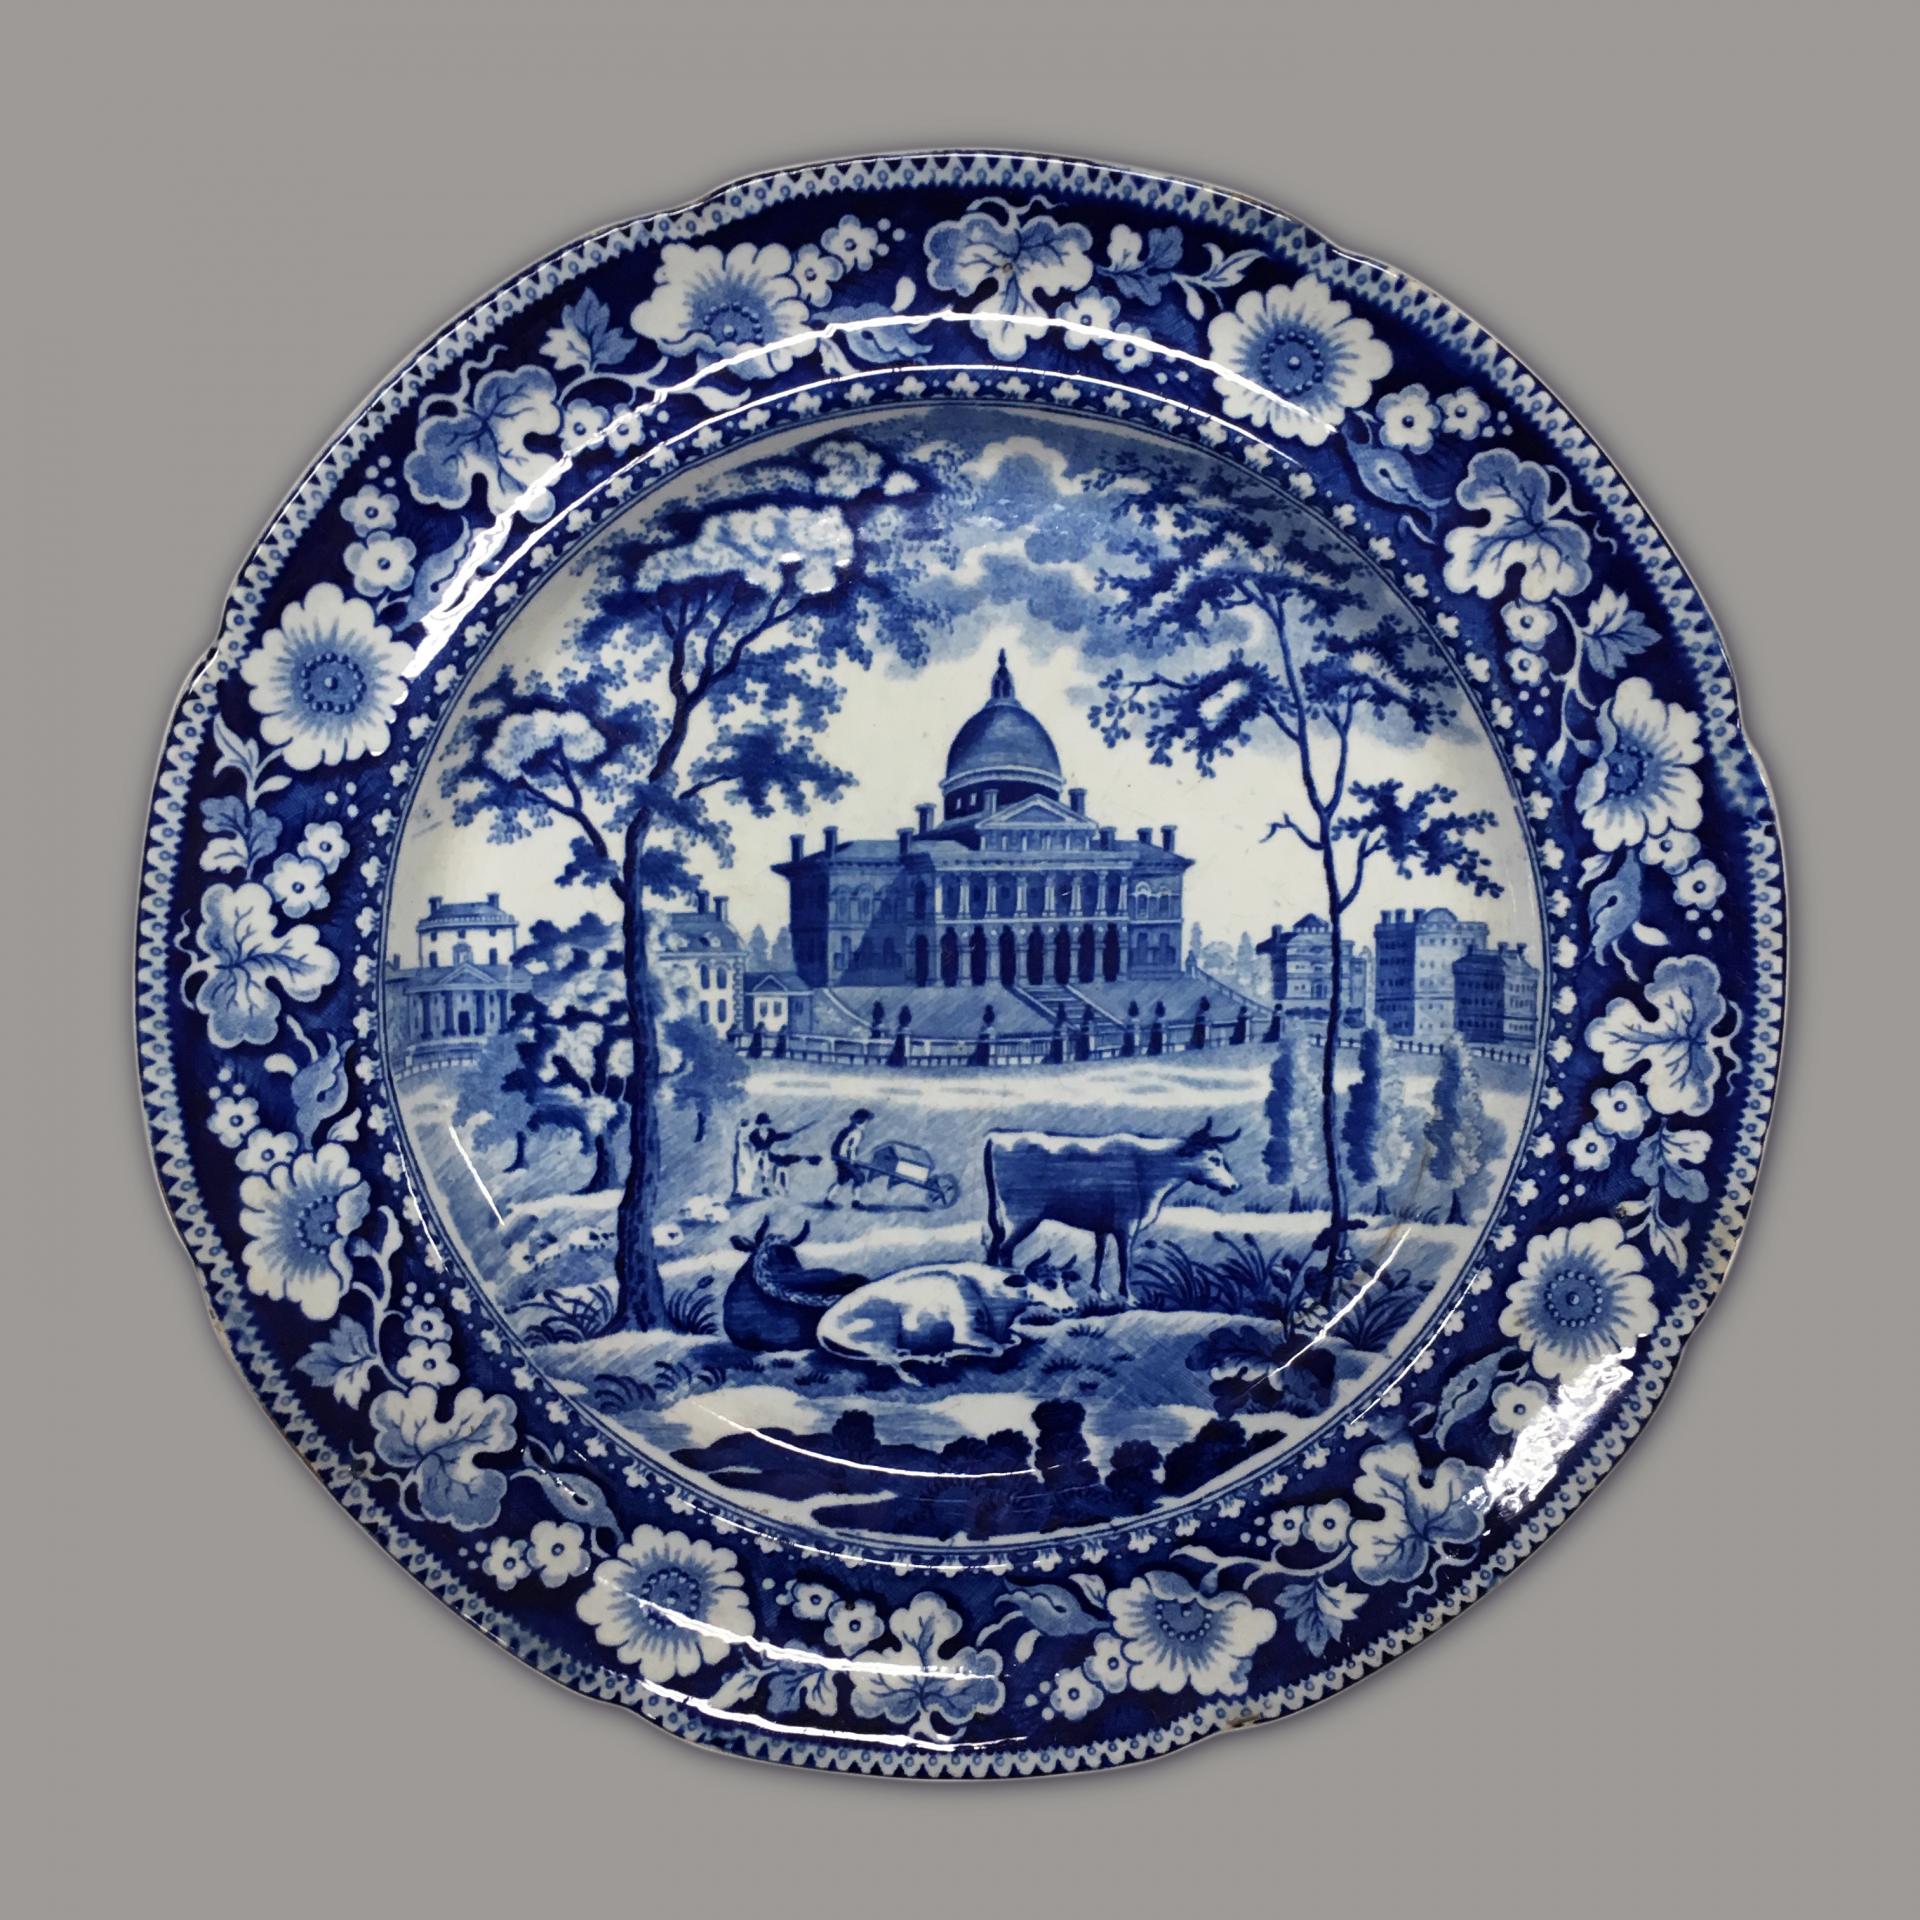 blue and white transferware plate depicting the Boston State House with cows in the foreground